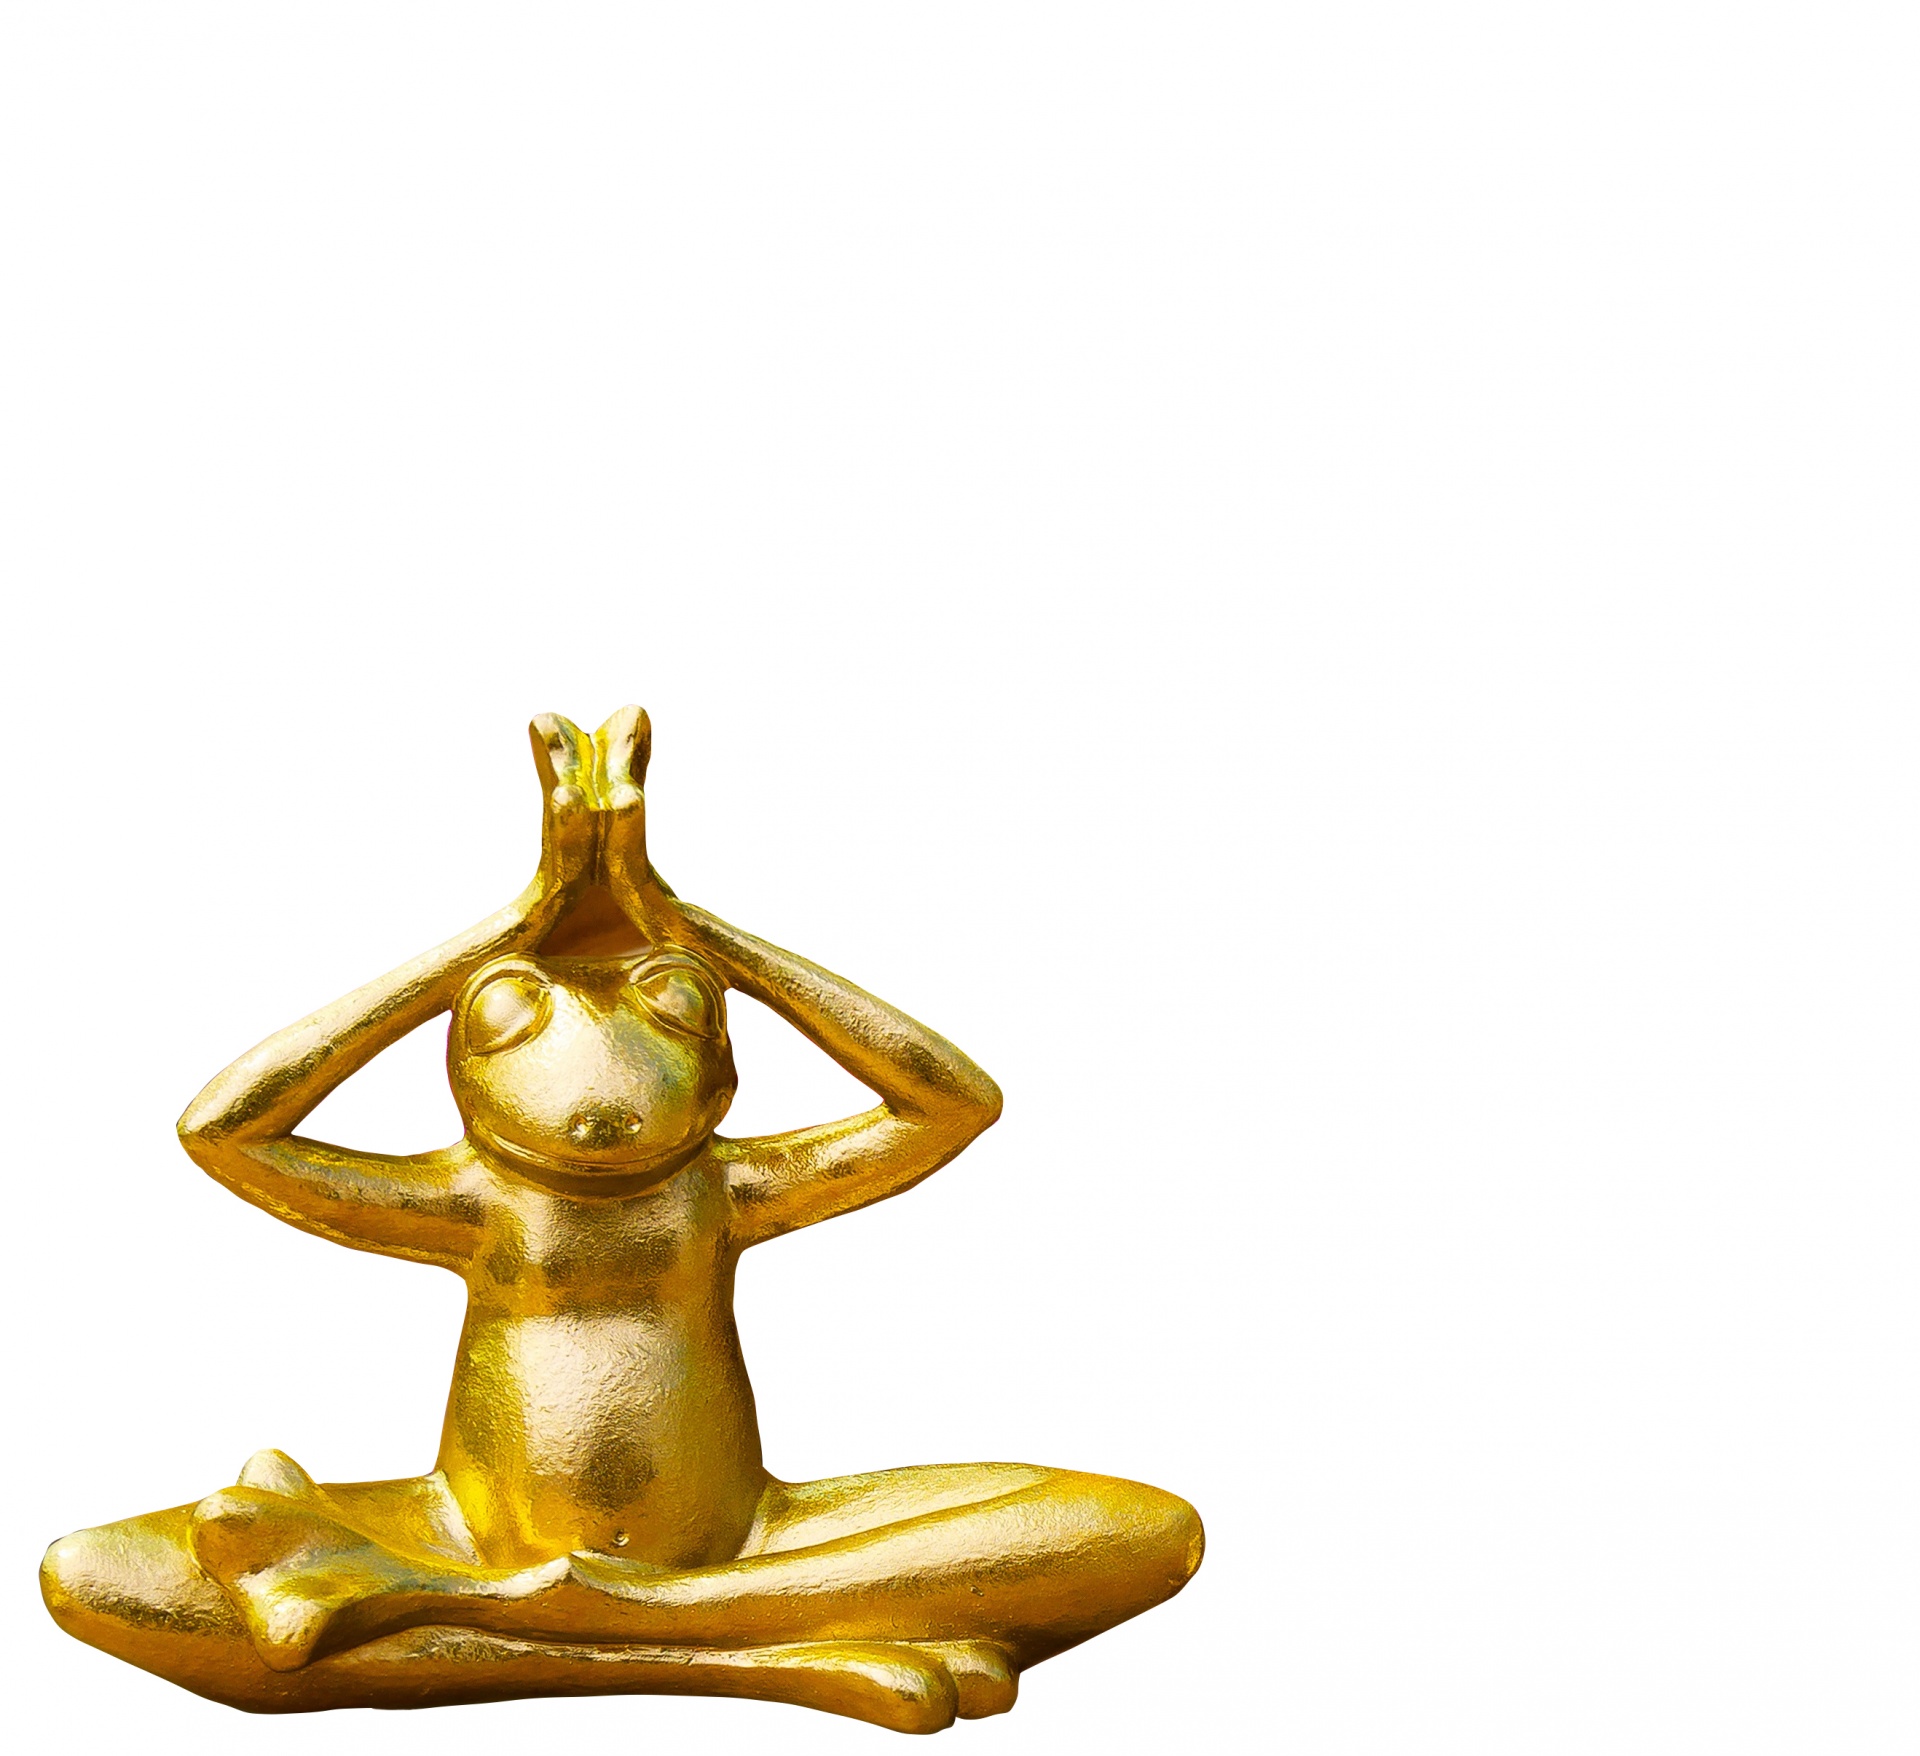 Frog Golden Statue Isolated